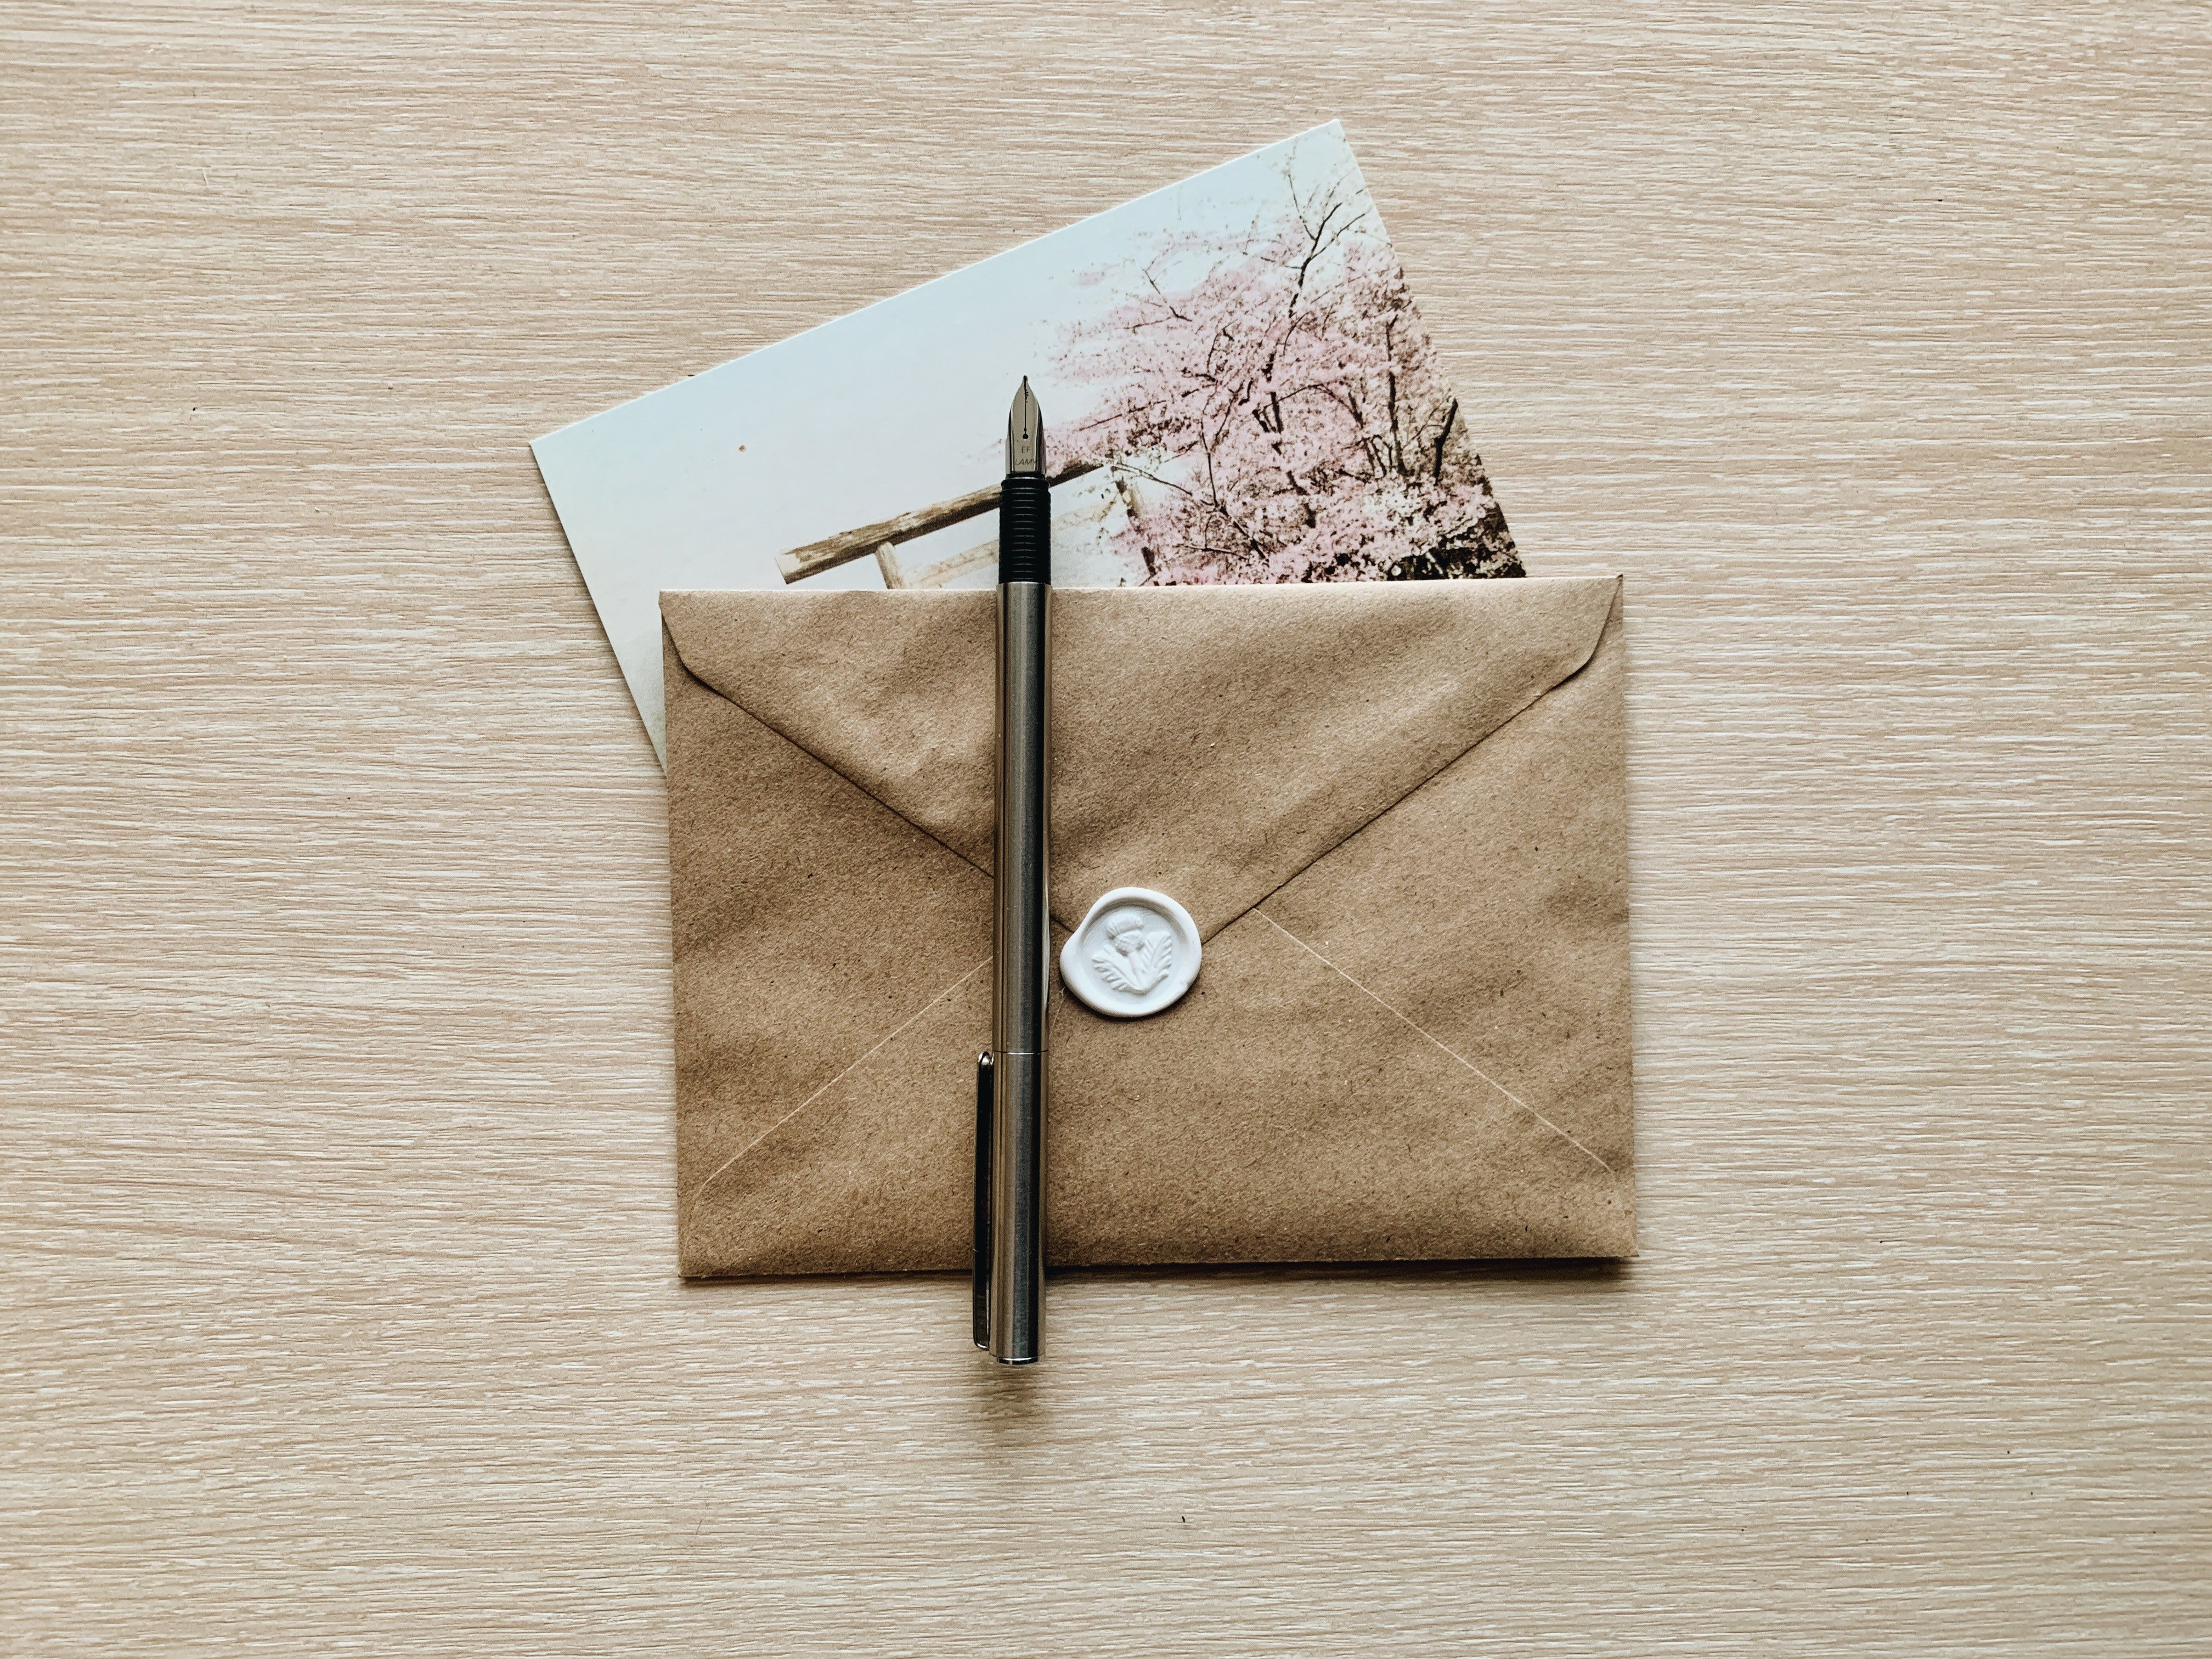 Susan received an envelope from George. | Source: Pexels